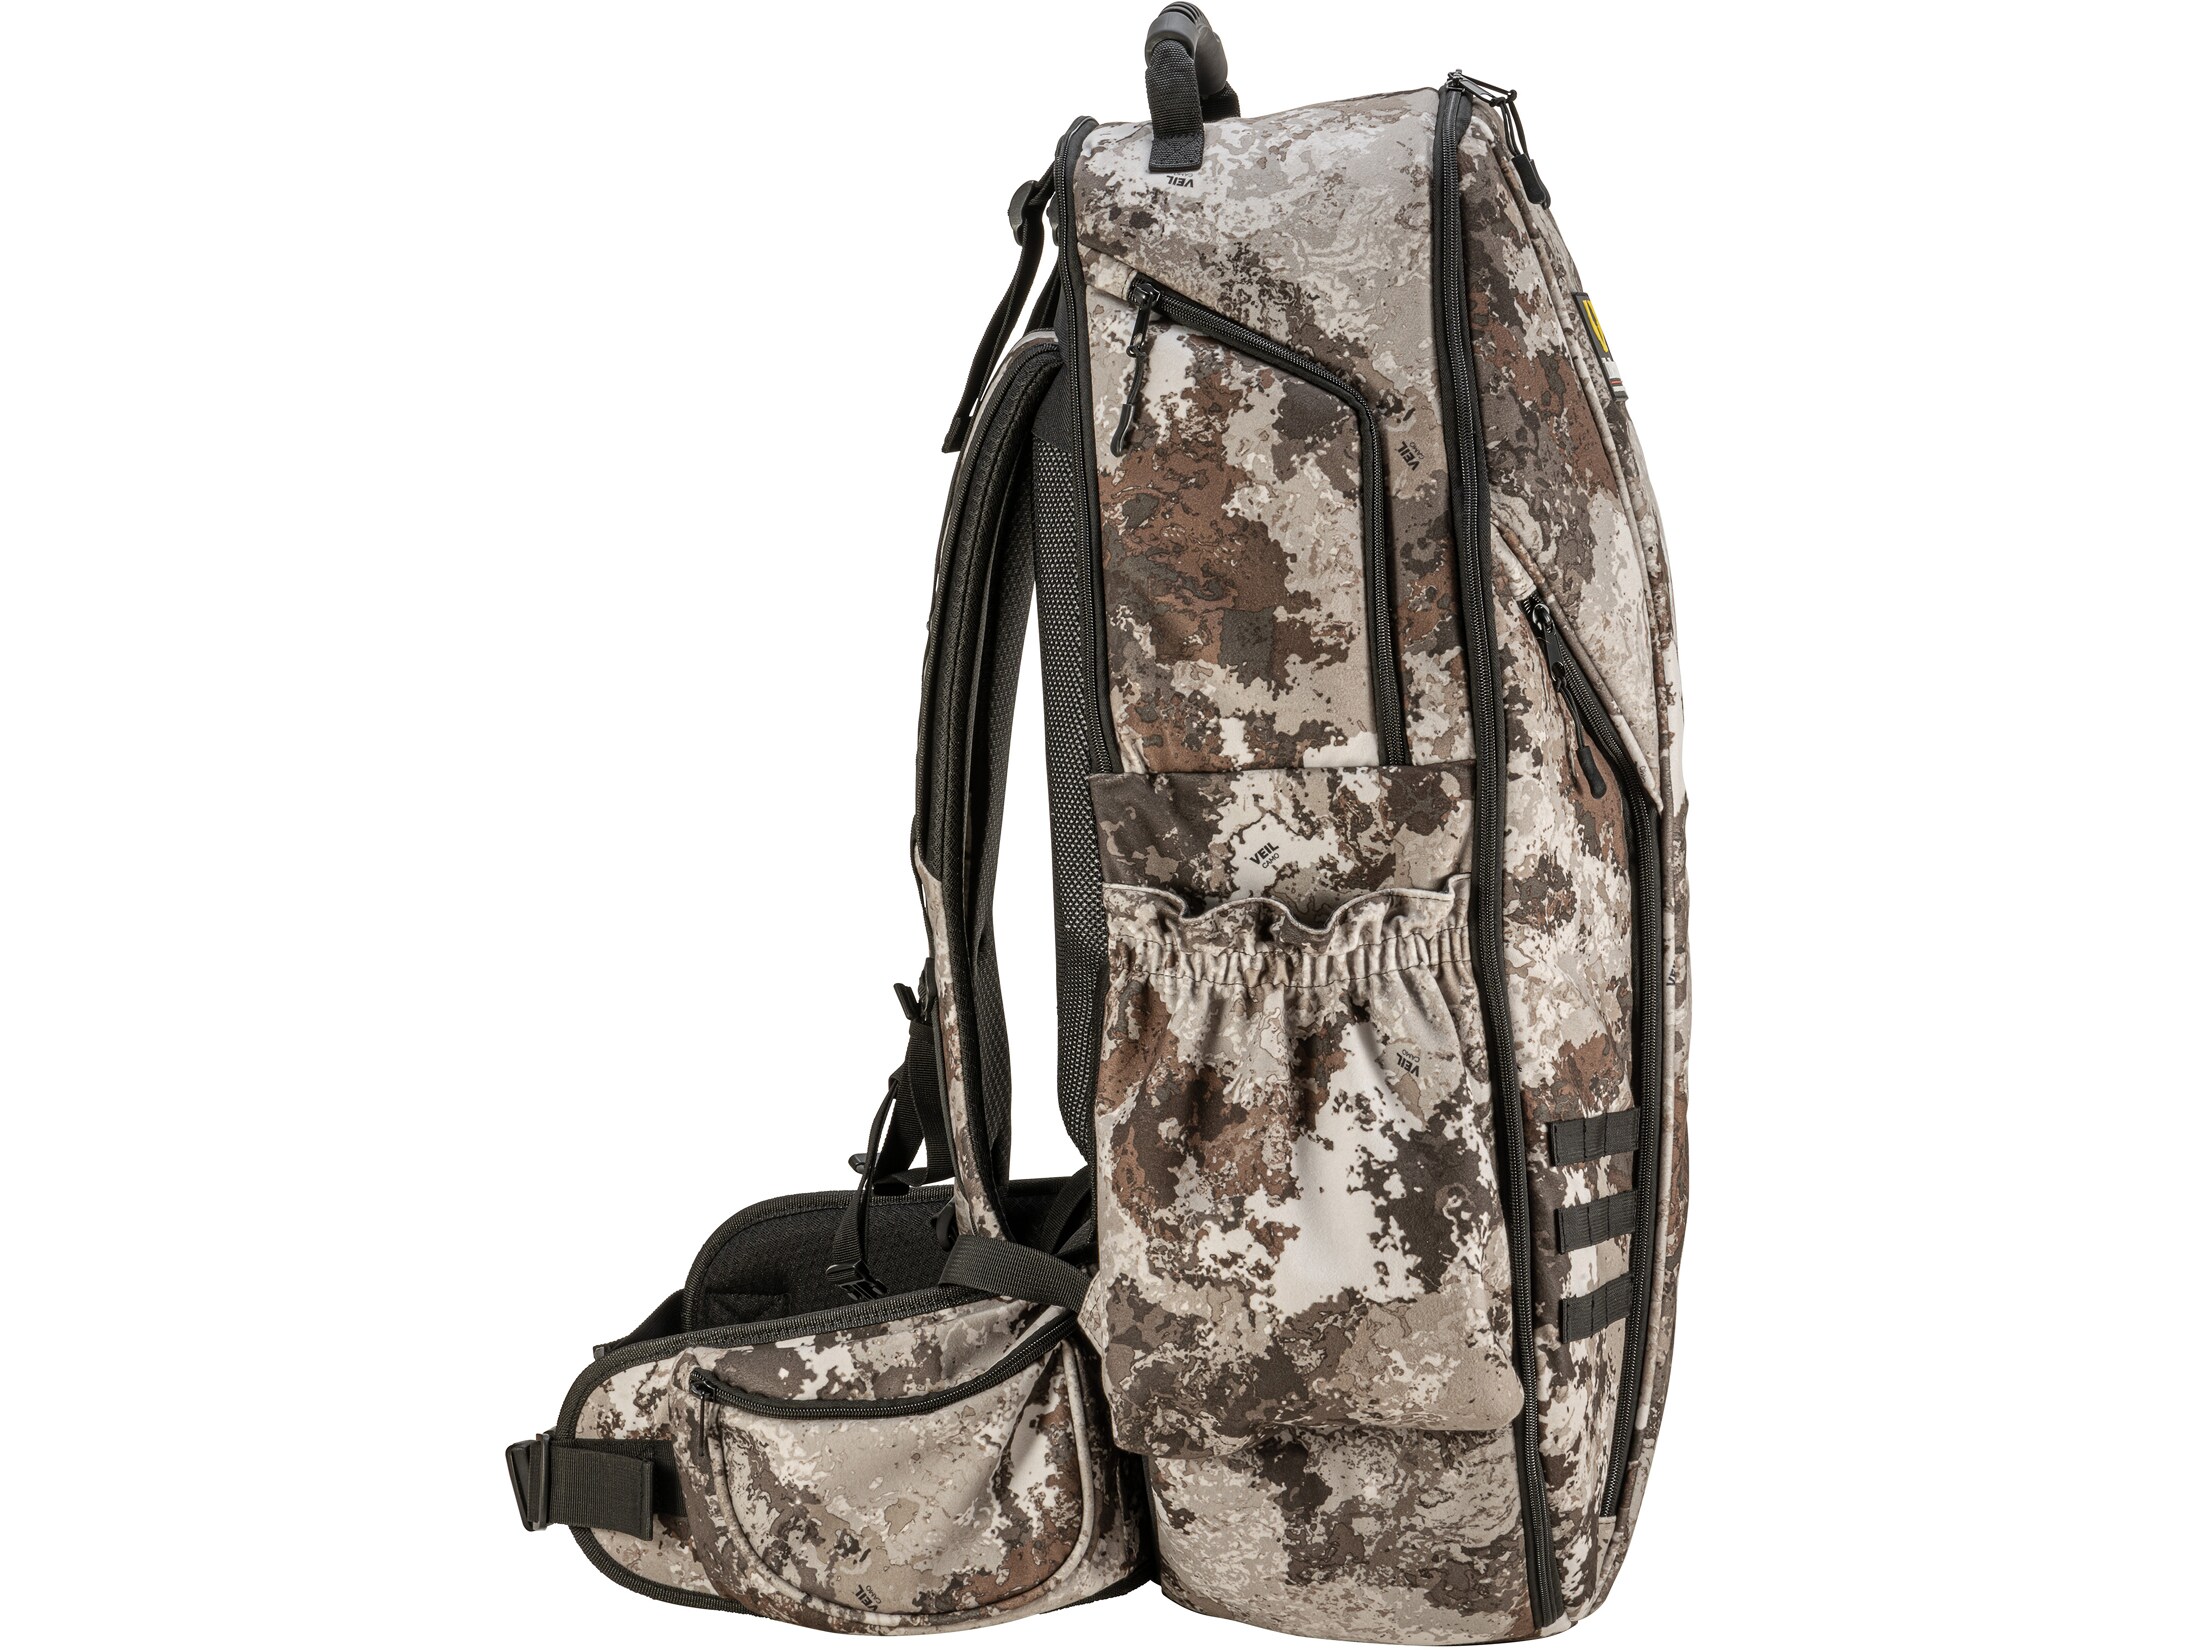 TenPoint Halo Crossbow Backpack For Sale